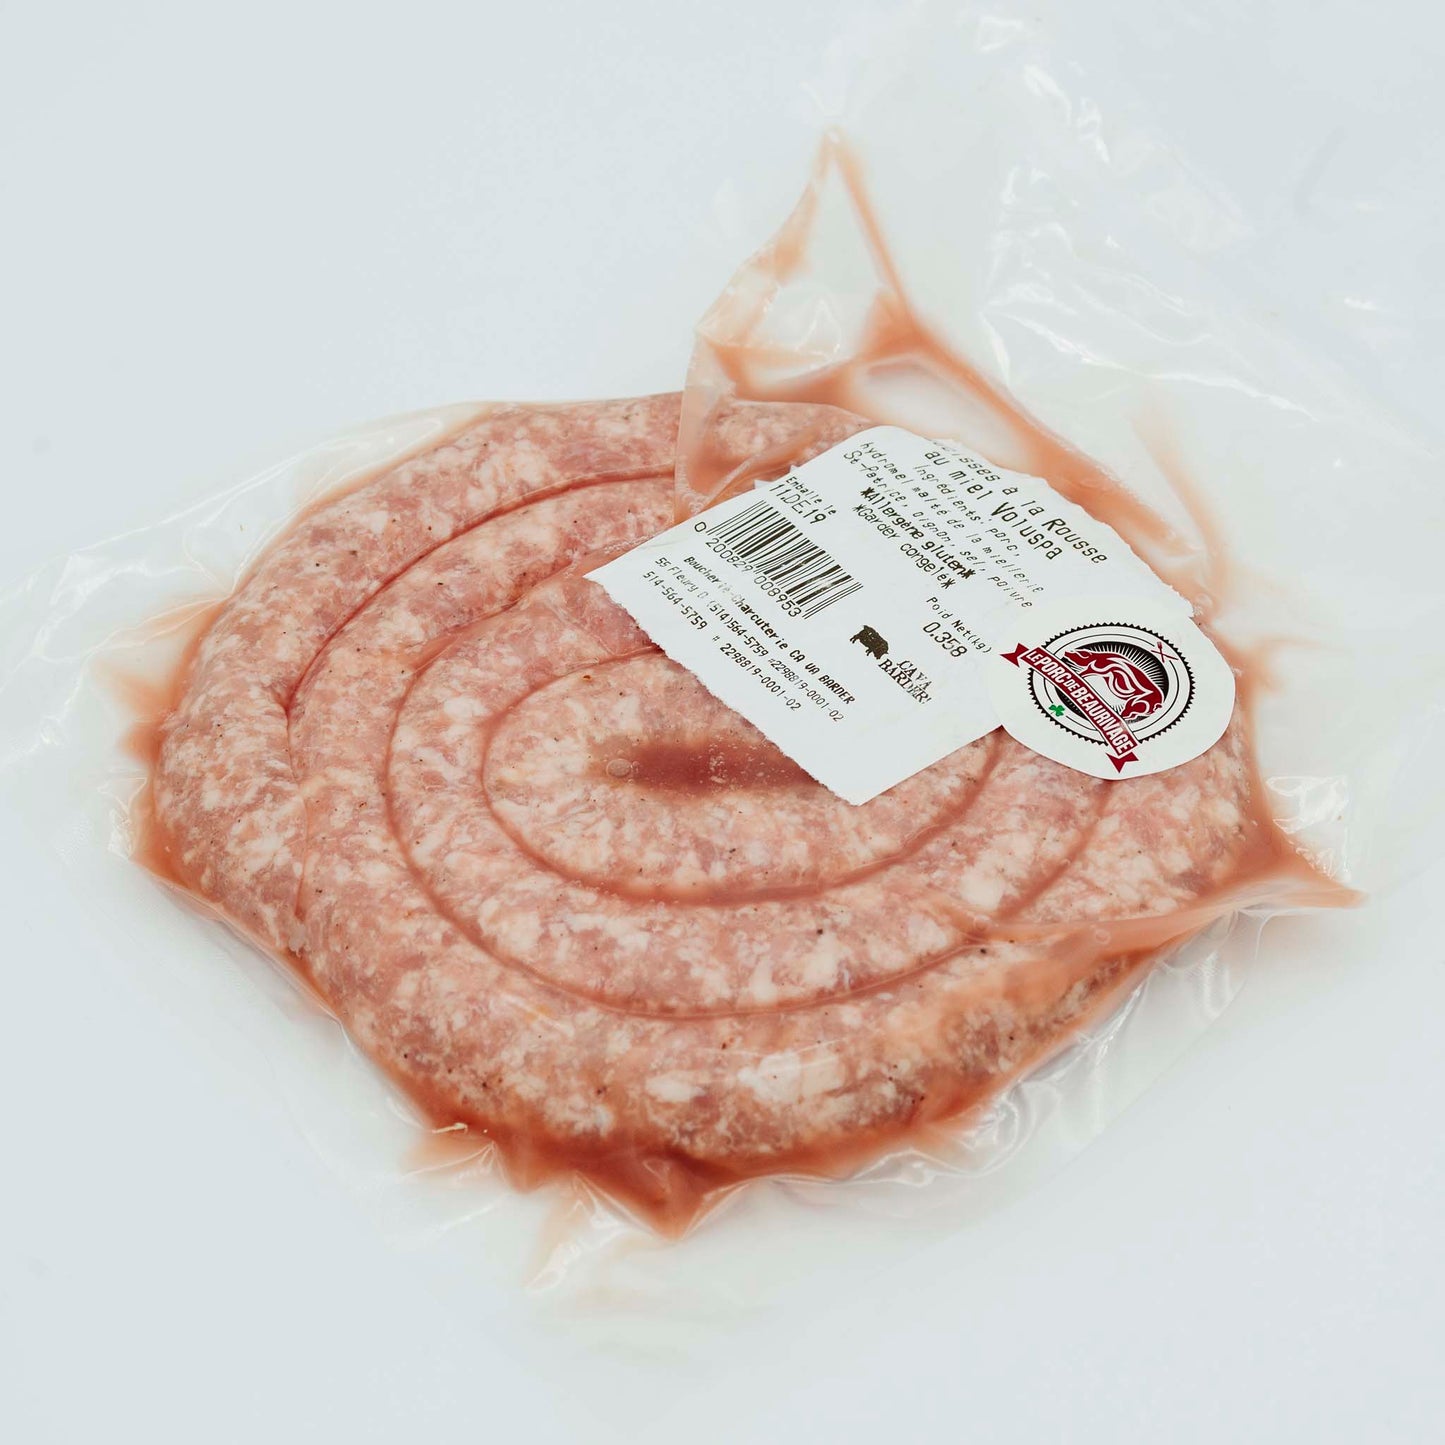 Honey beer sausage coils - 300g (Pick-up only)